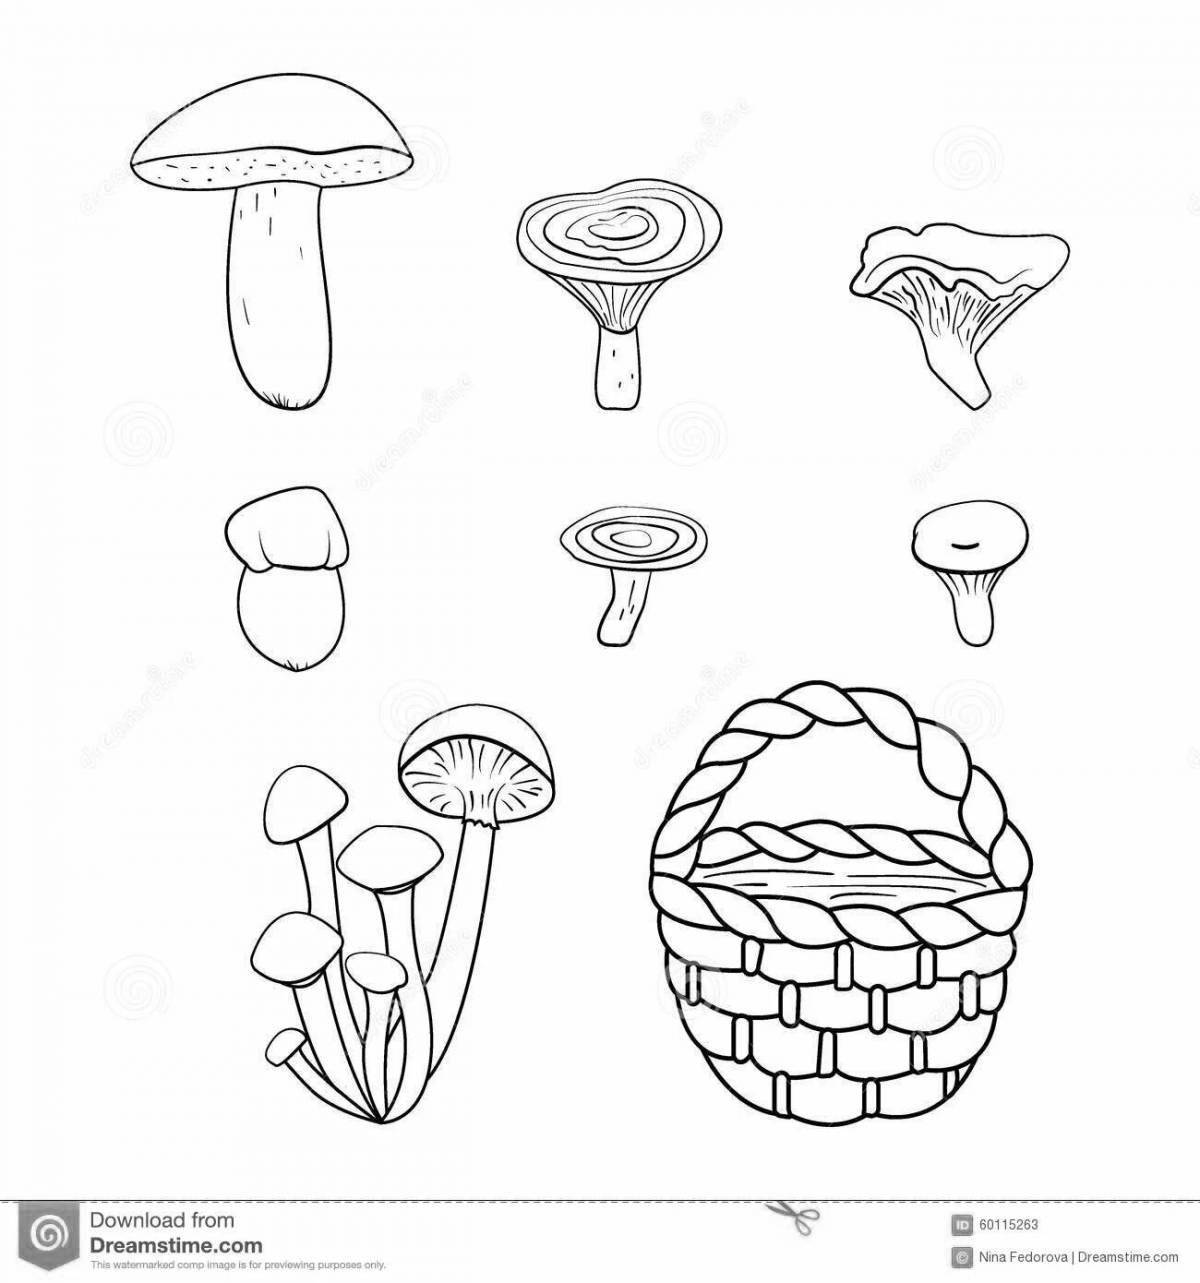 Coloring book funny basket with mushrooms